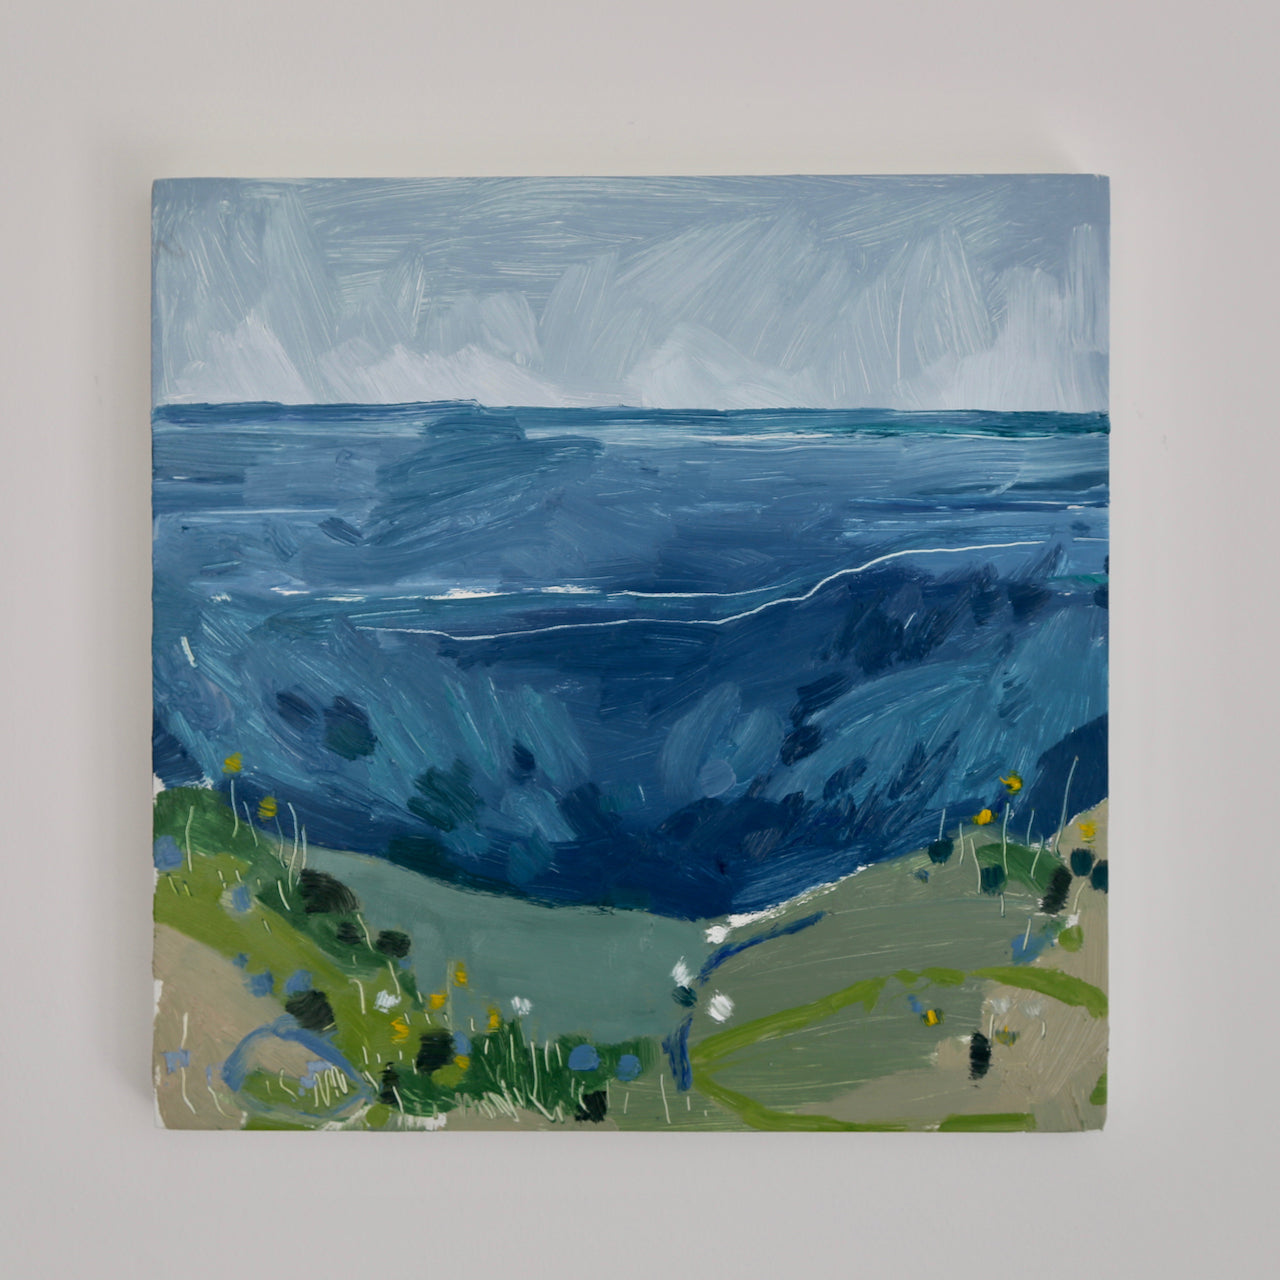 An abstract painting of Over Sharrow by Aimee Willcock